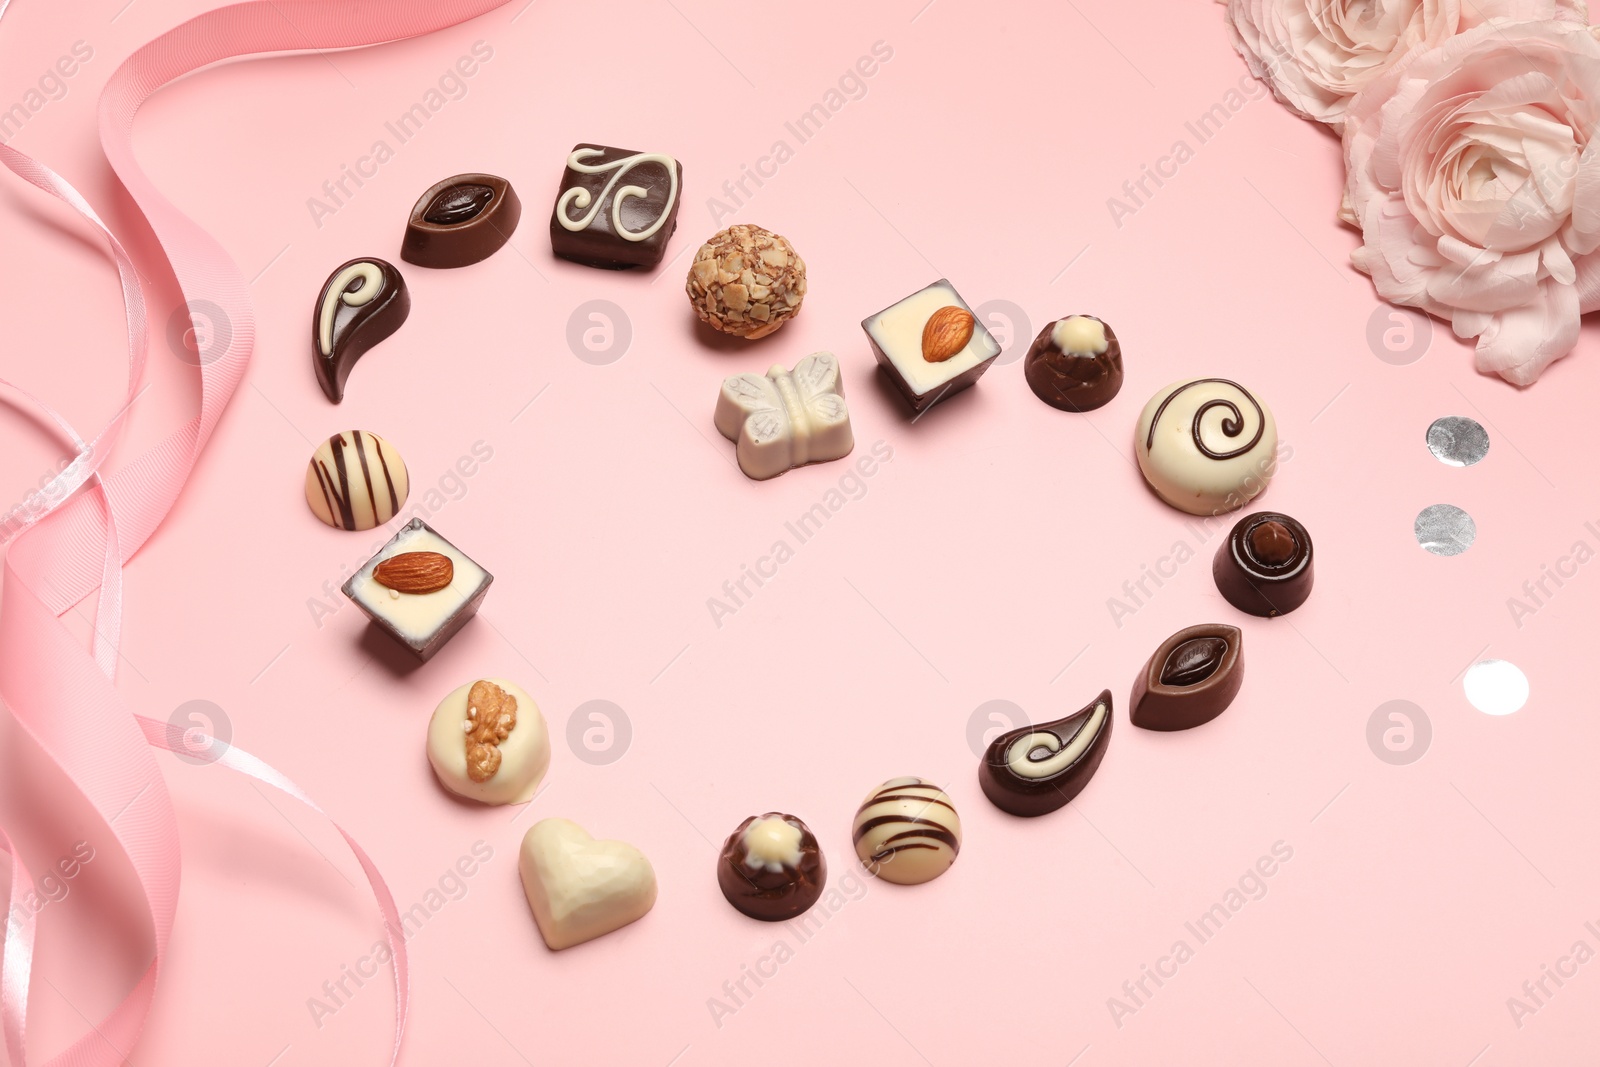 Photo of Heart made with delicious chocolate candies on light pink background